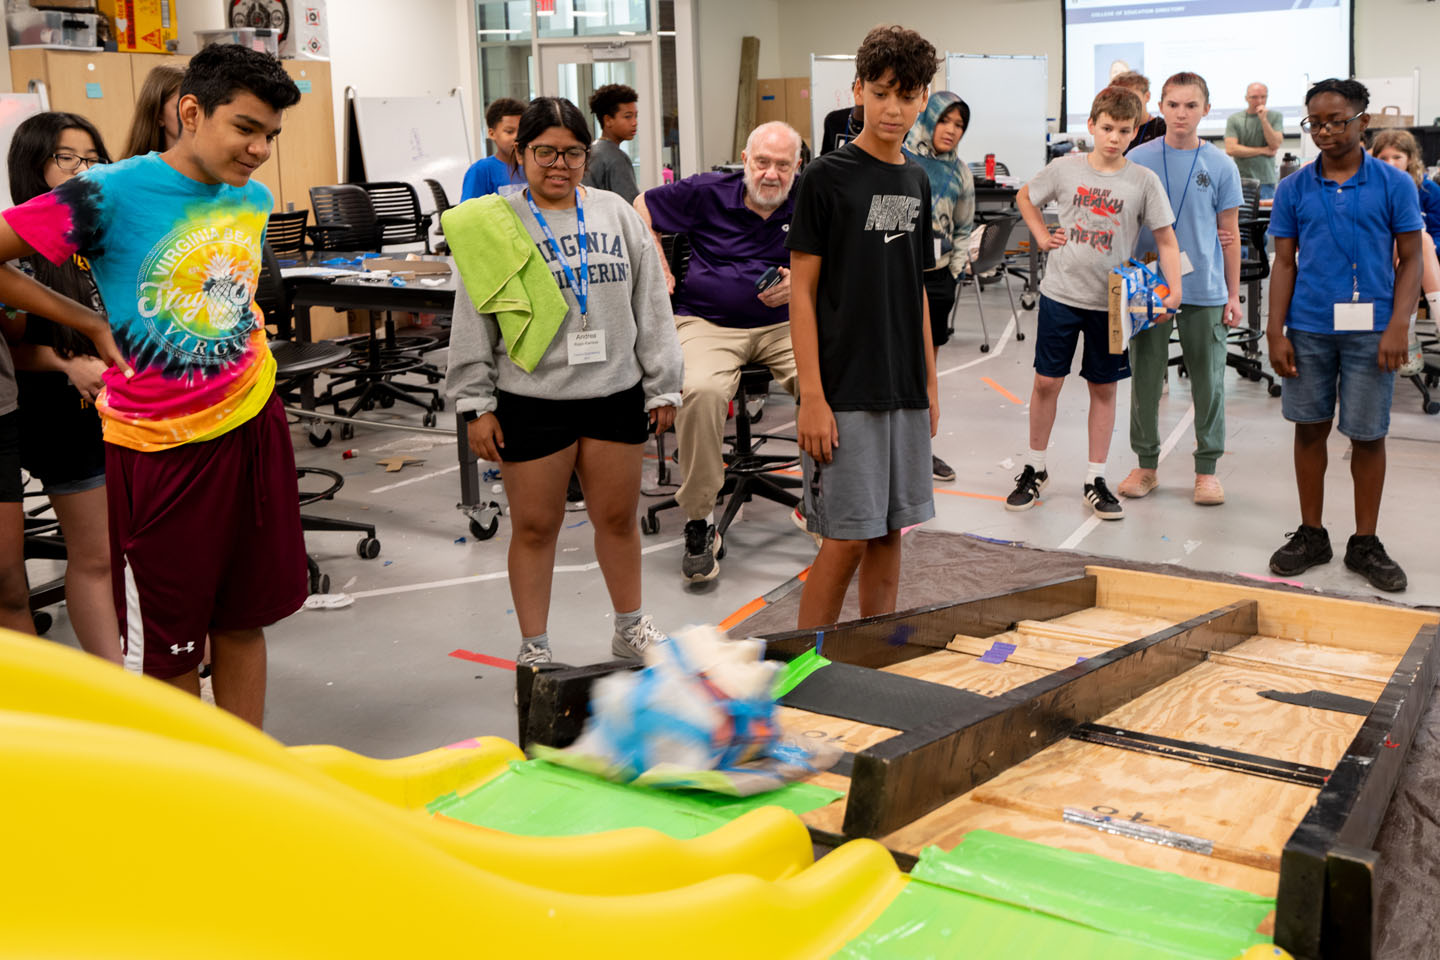 From left, Anthony Castillo (in the tie-dyed shirt), Andrea Rojas Ramirez (a Society of Women Engineers member), Evan Fisher, Harlem Stanford (peeking out from hoodie), William Beaver, Celeste Ide, and T.J. (Tavarus) Gray await the results.